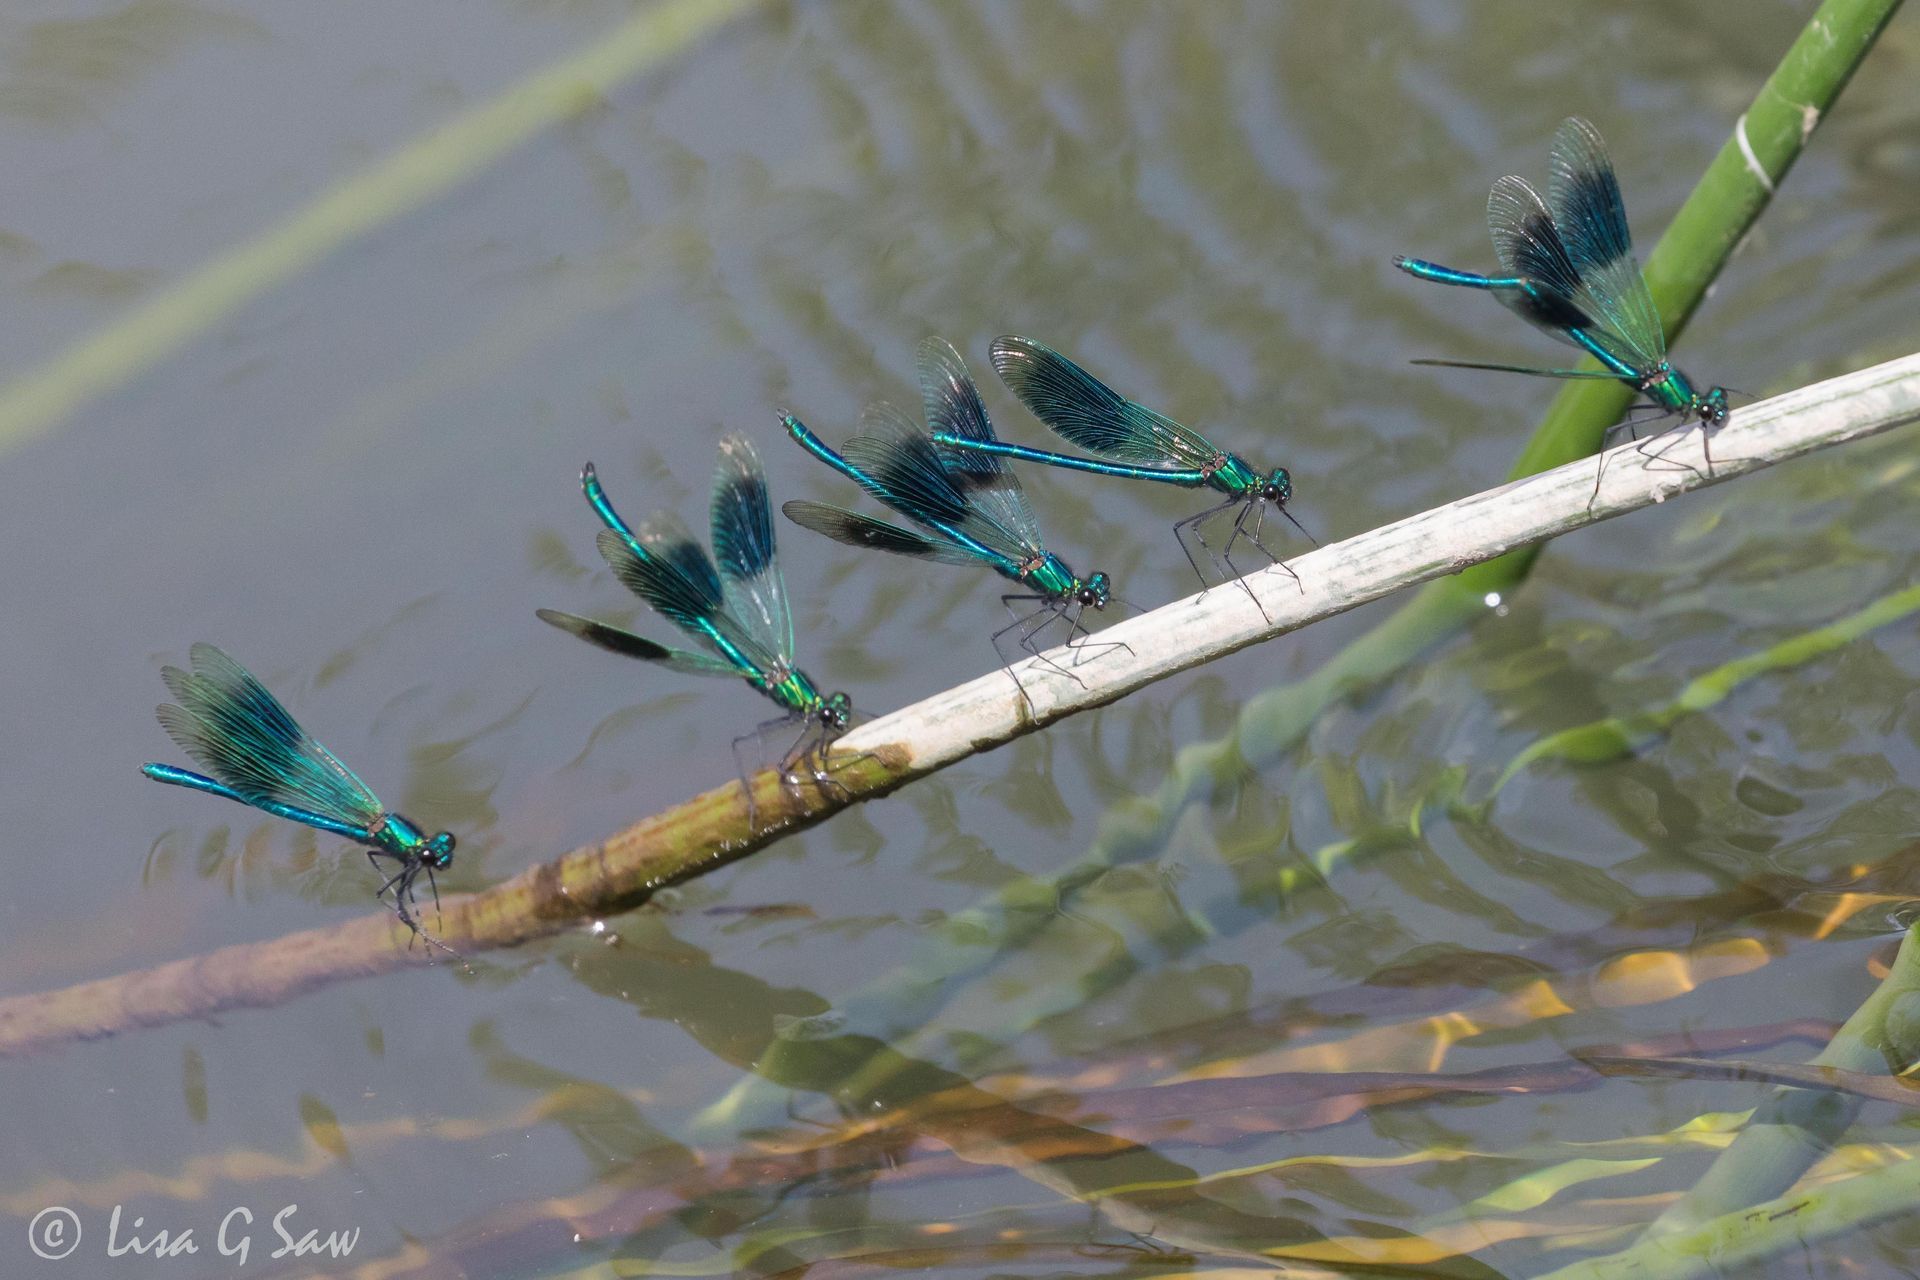 Five Male Banded Demoiselles Resting on Reed